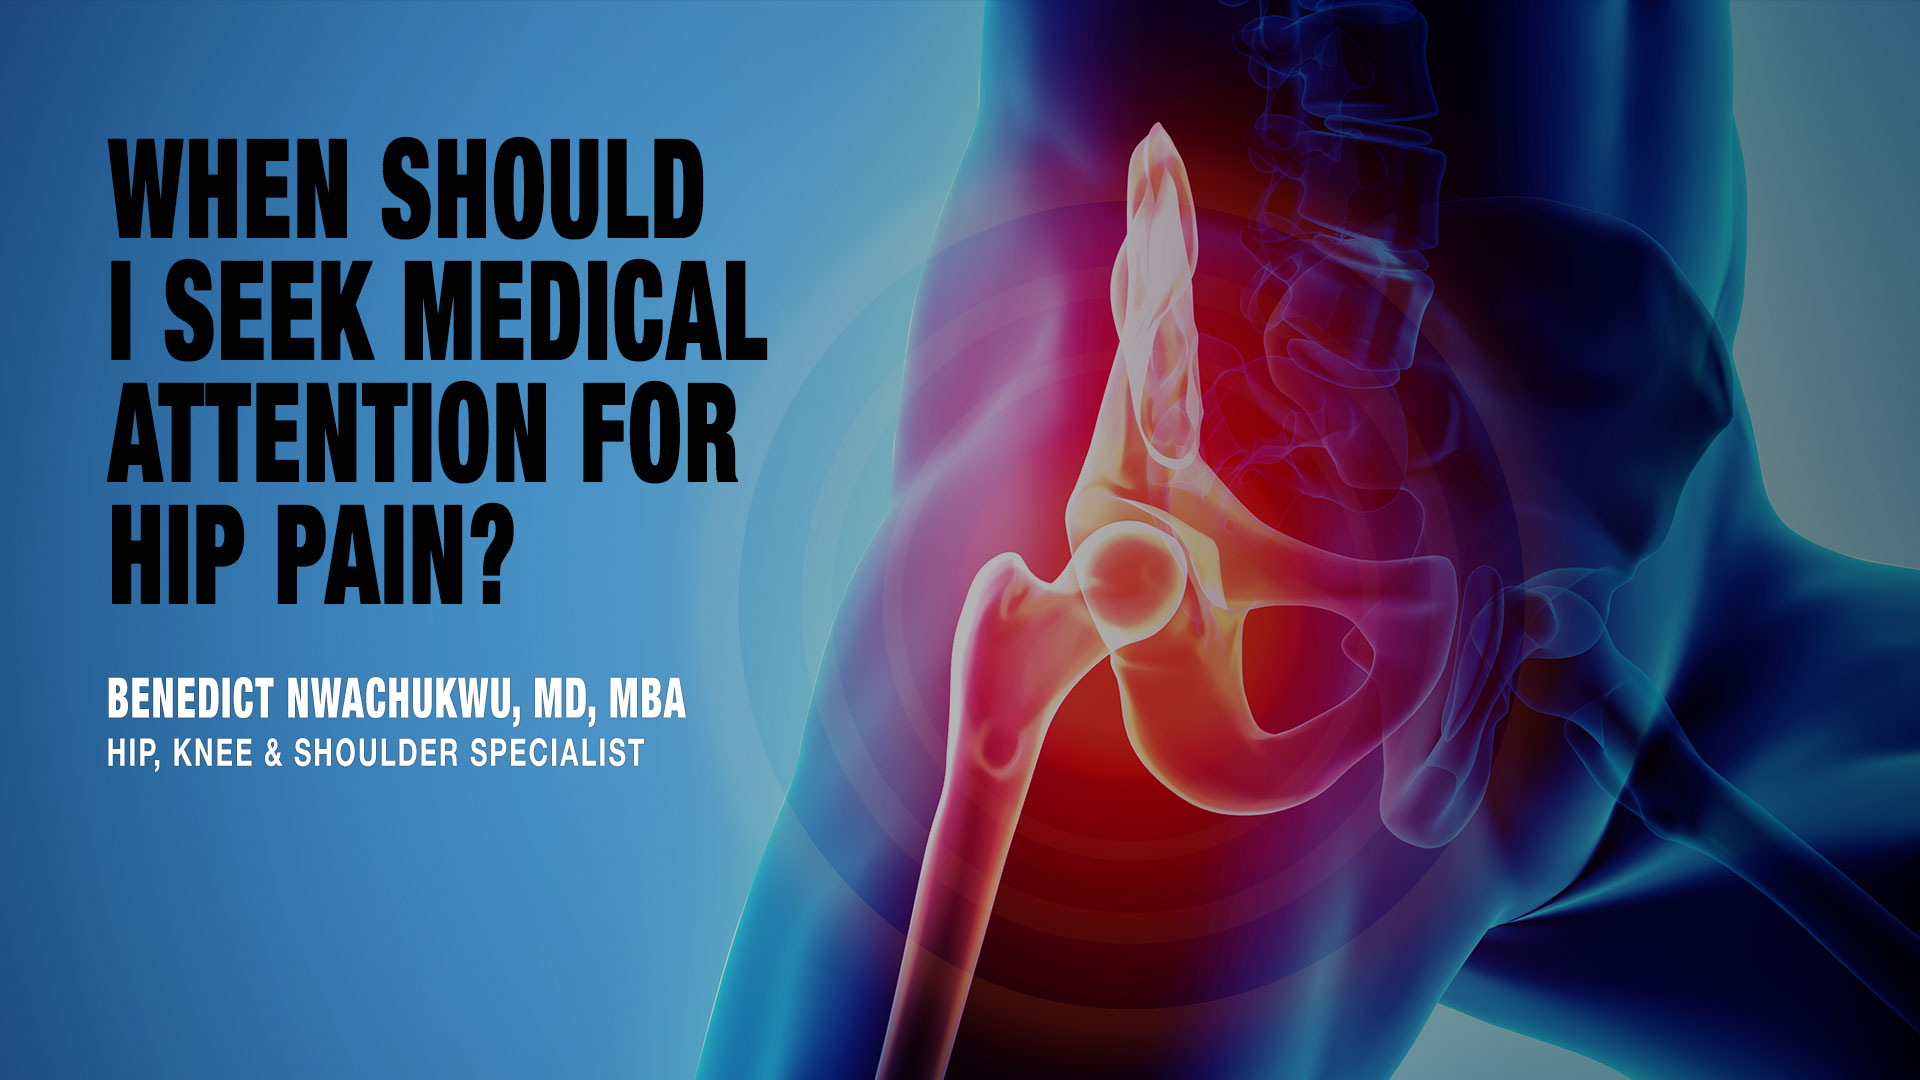 When should you seek medical attention for hip pain?